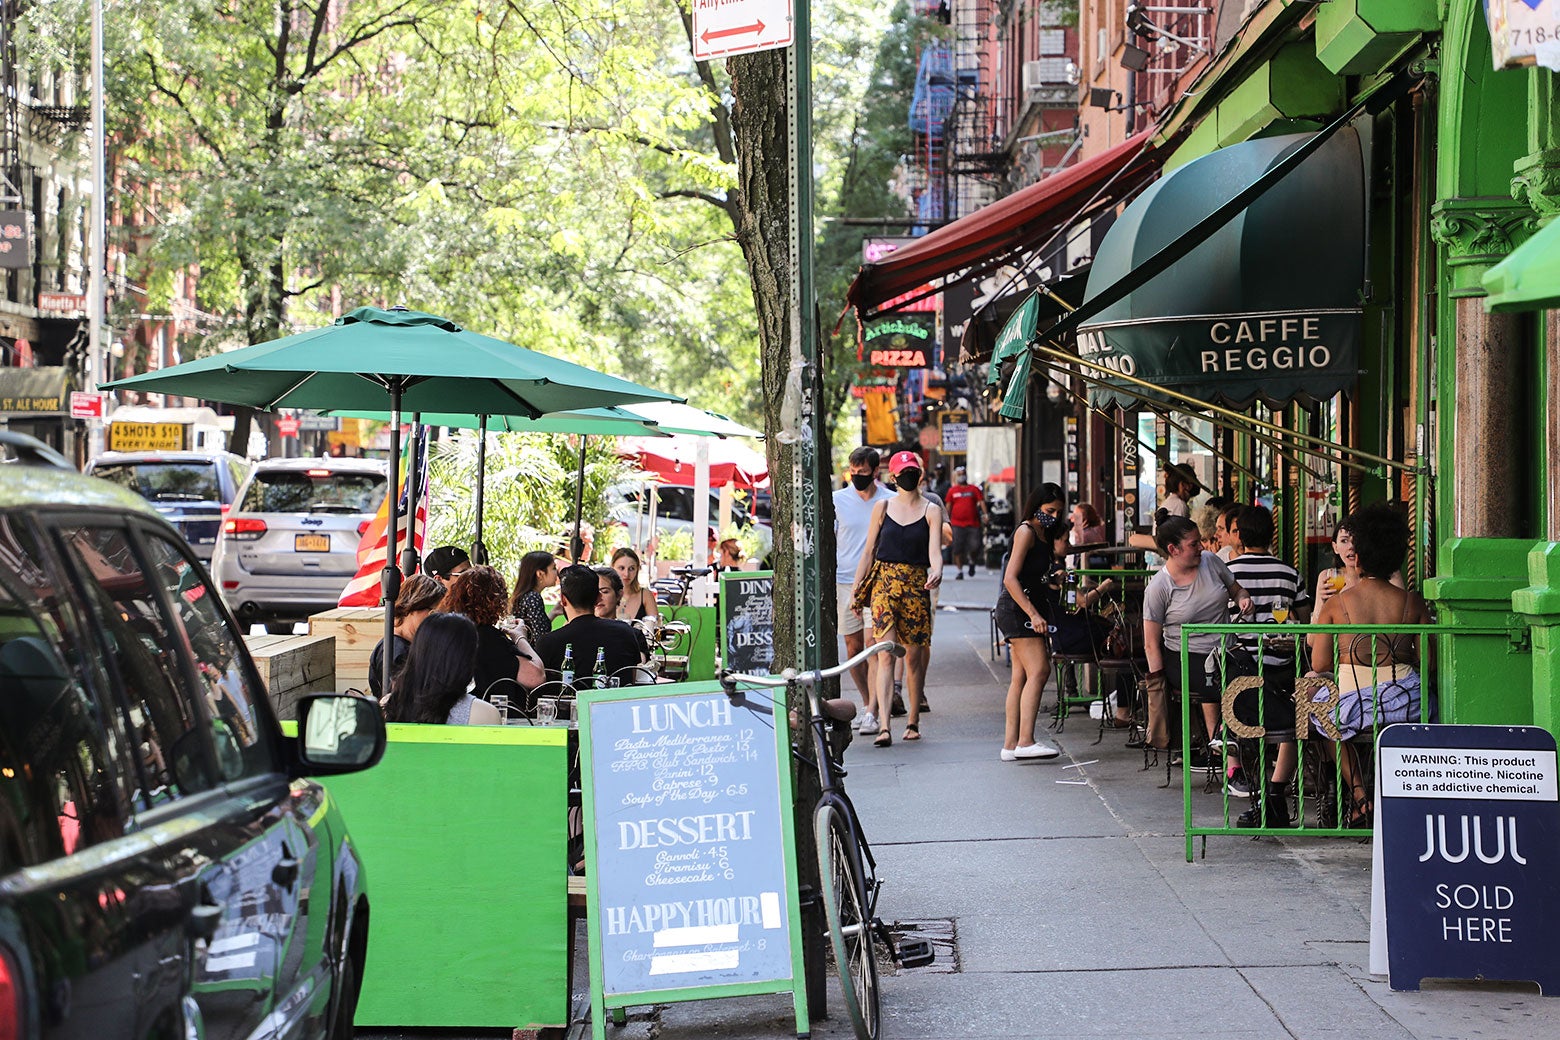 A busy street: sidewalk cafe diners, menu boards, a sign for Juul, and pedestrians.